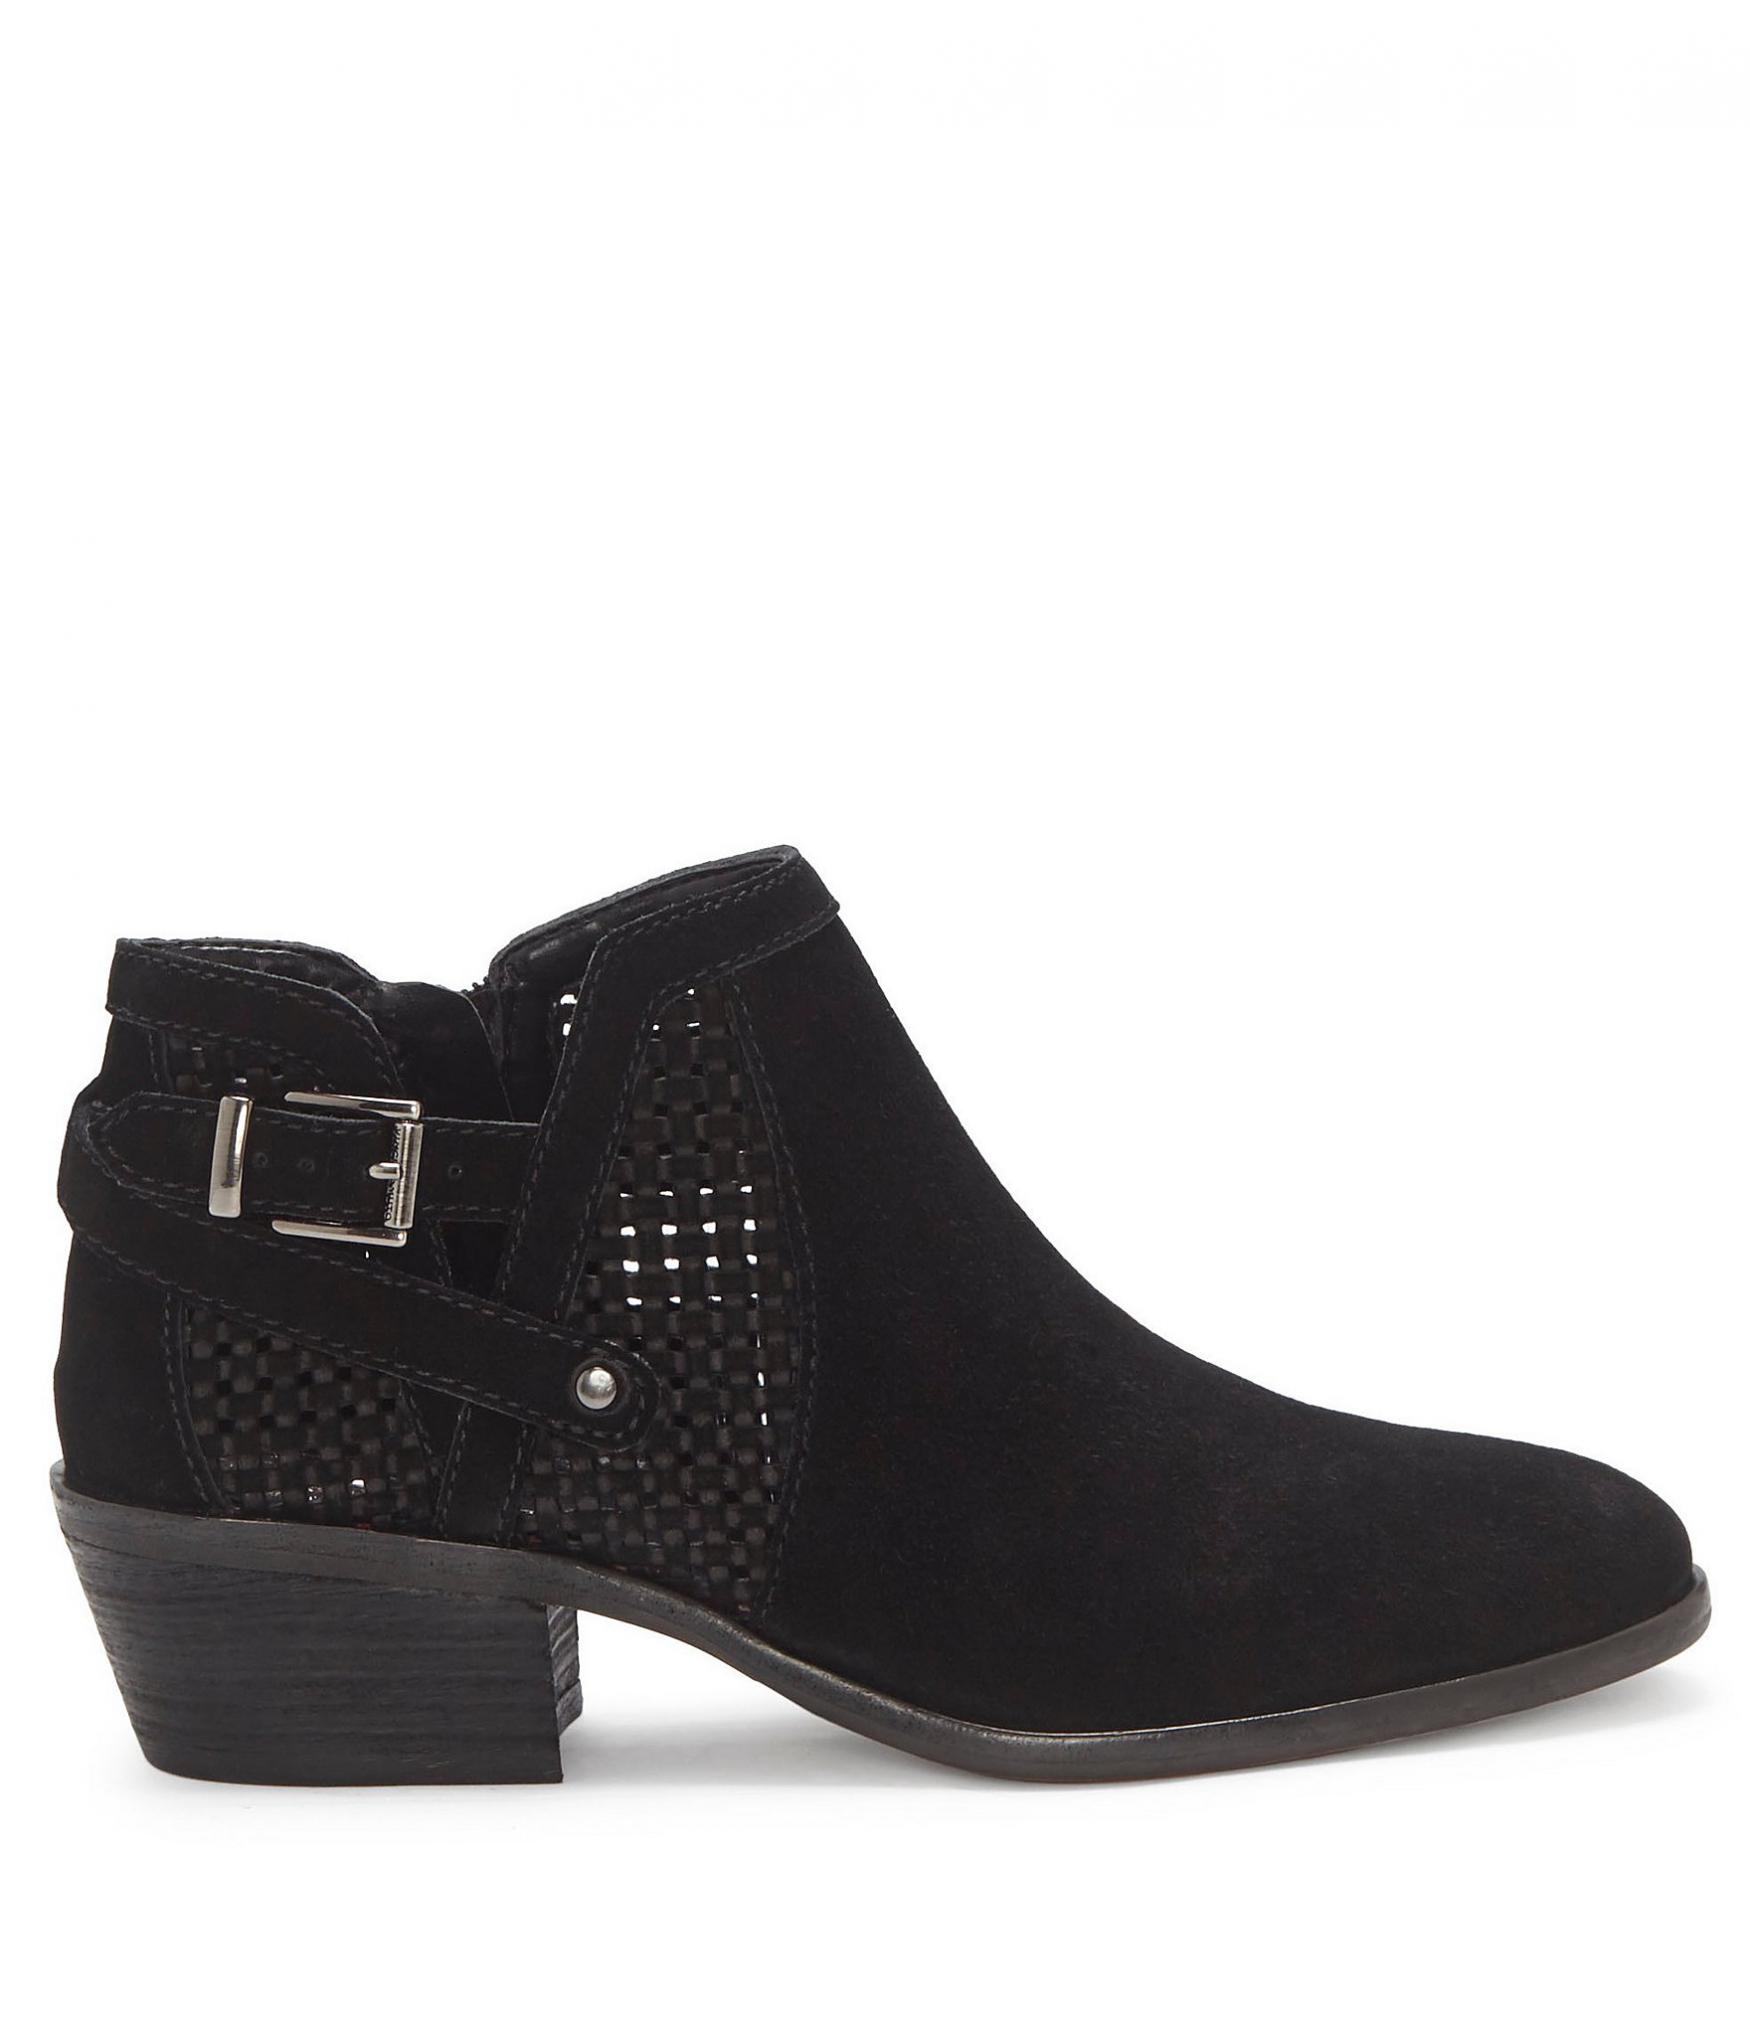 Details about   Vince Camuto Pamma Suede Buckle Block Heel Booties Multipl Sizes Black VC-PAMMA